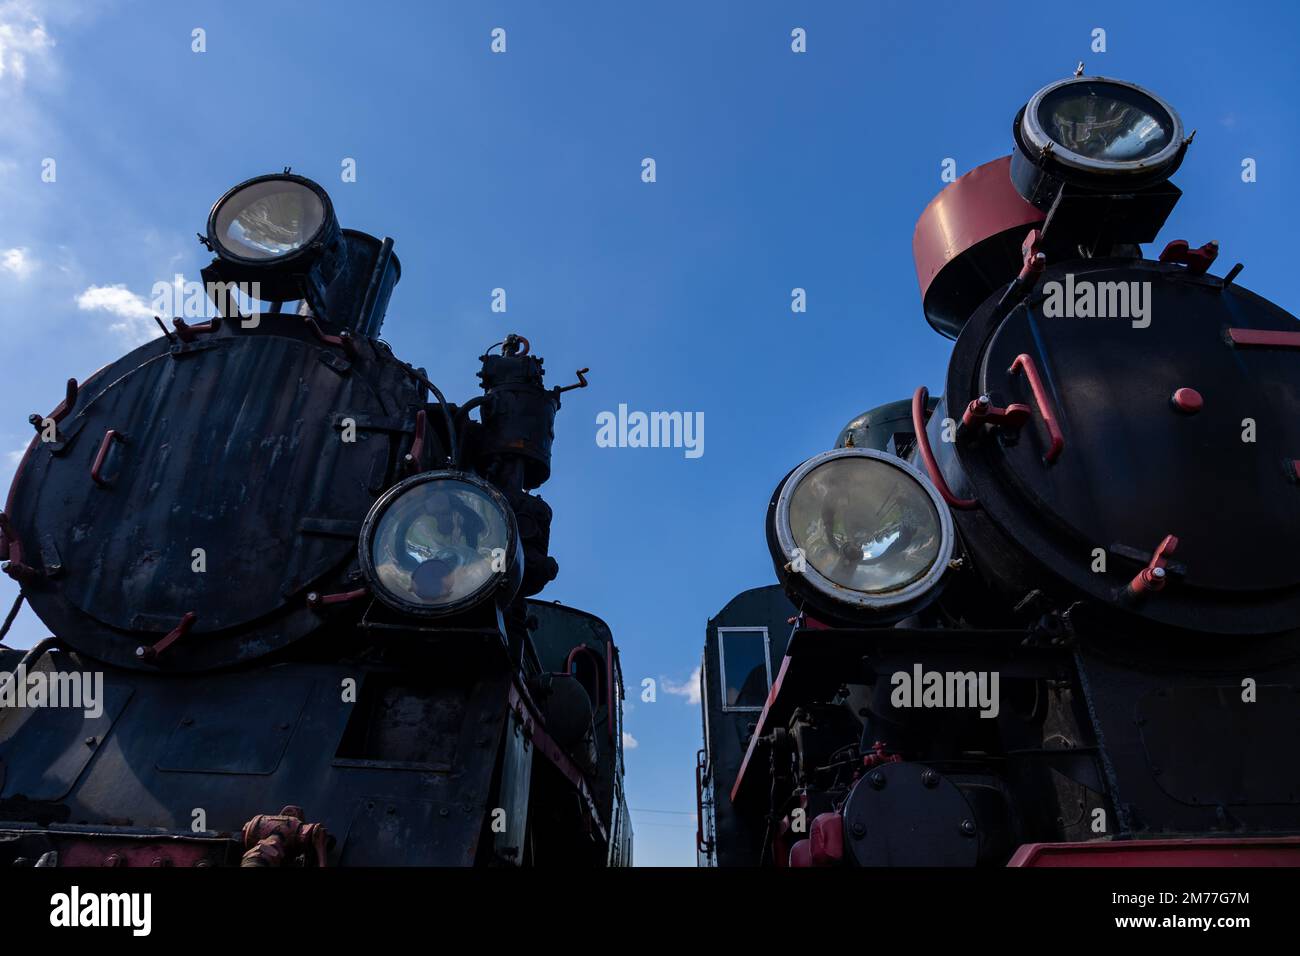 Front view of two steam locomotives standing side by side. Bottom view showing objects against a blue sky Stock Photo